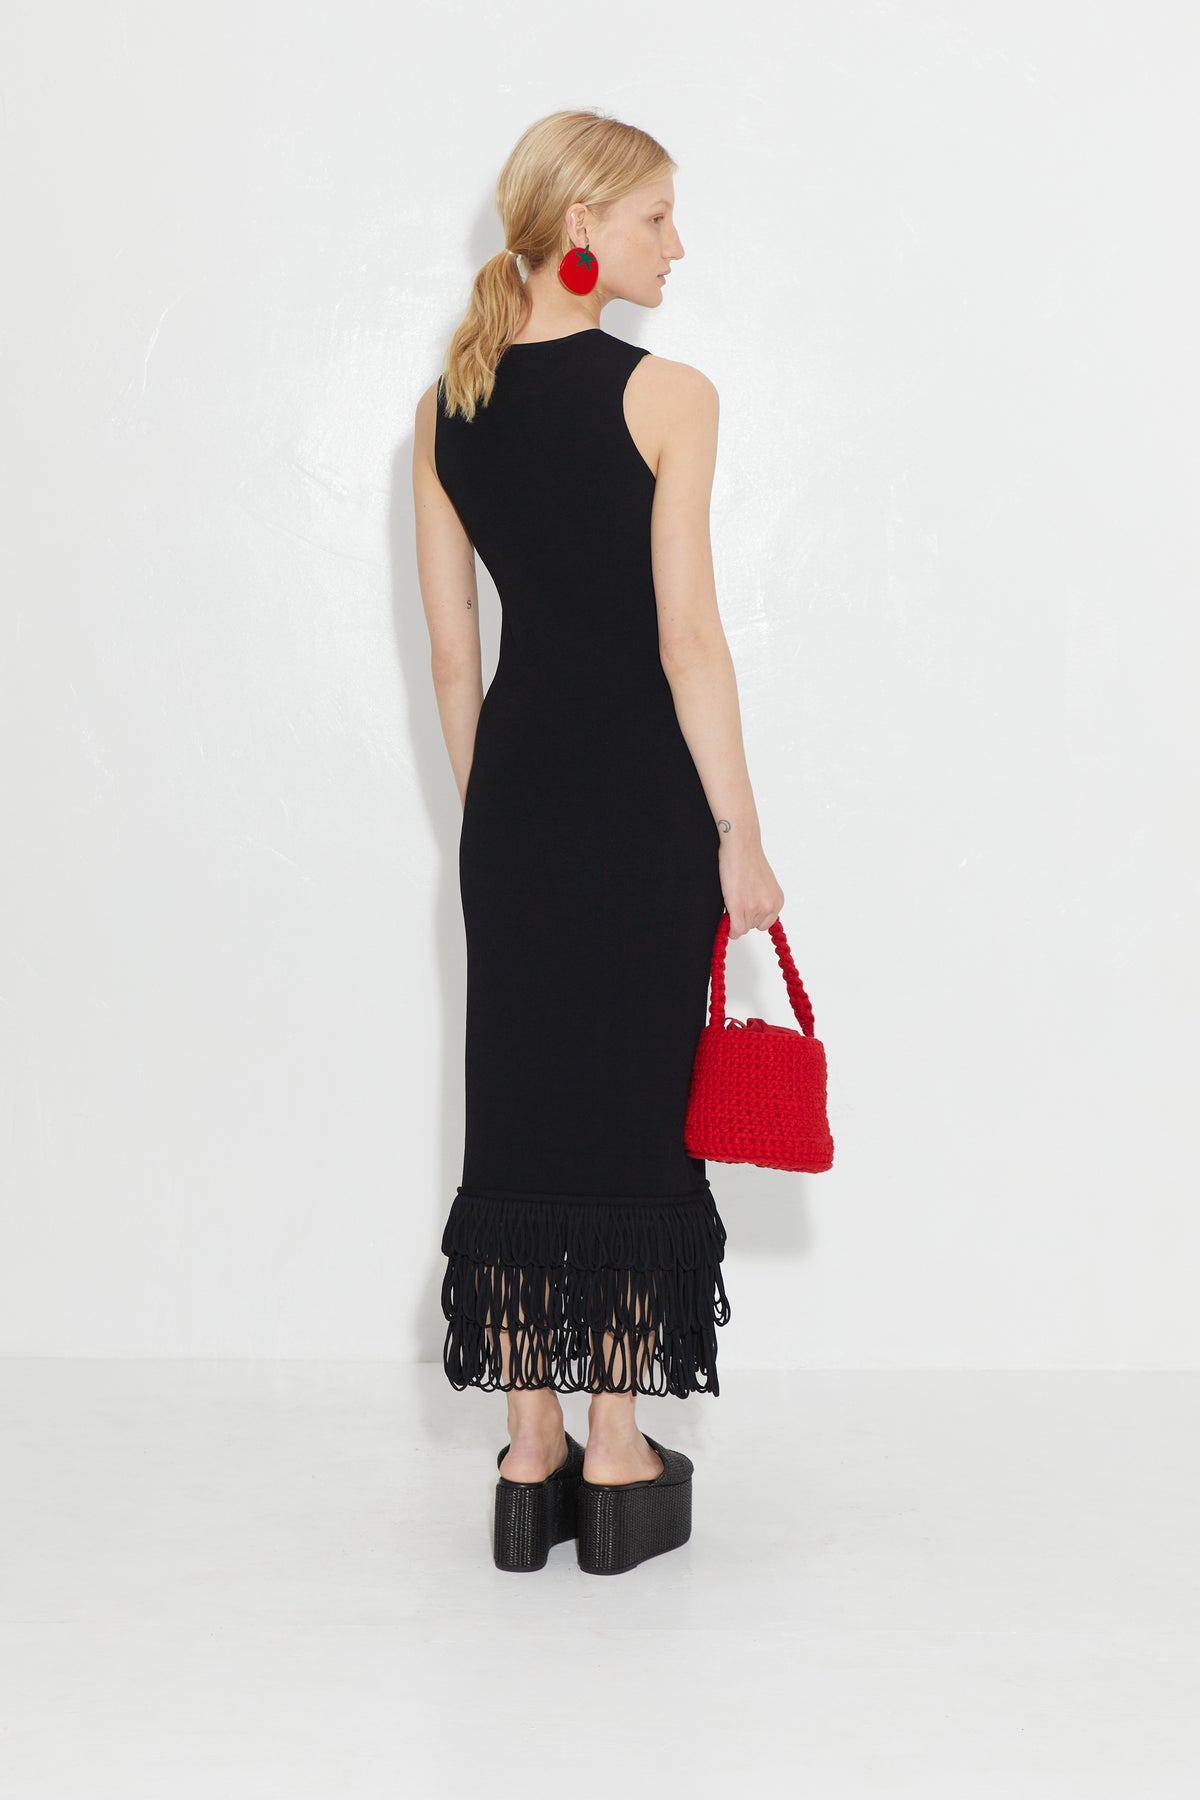 Knits By Albers Dress in Black